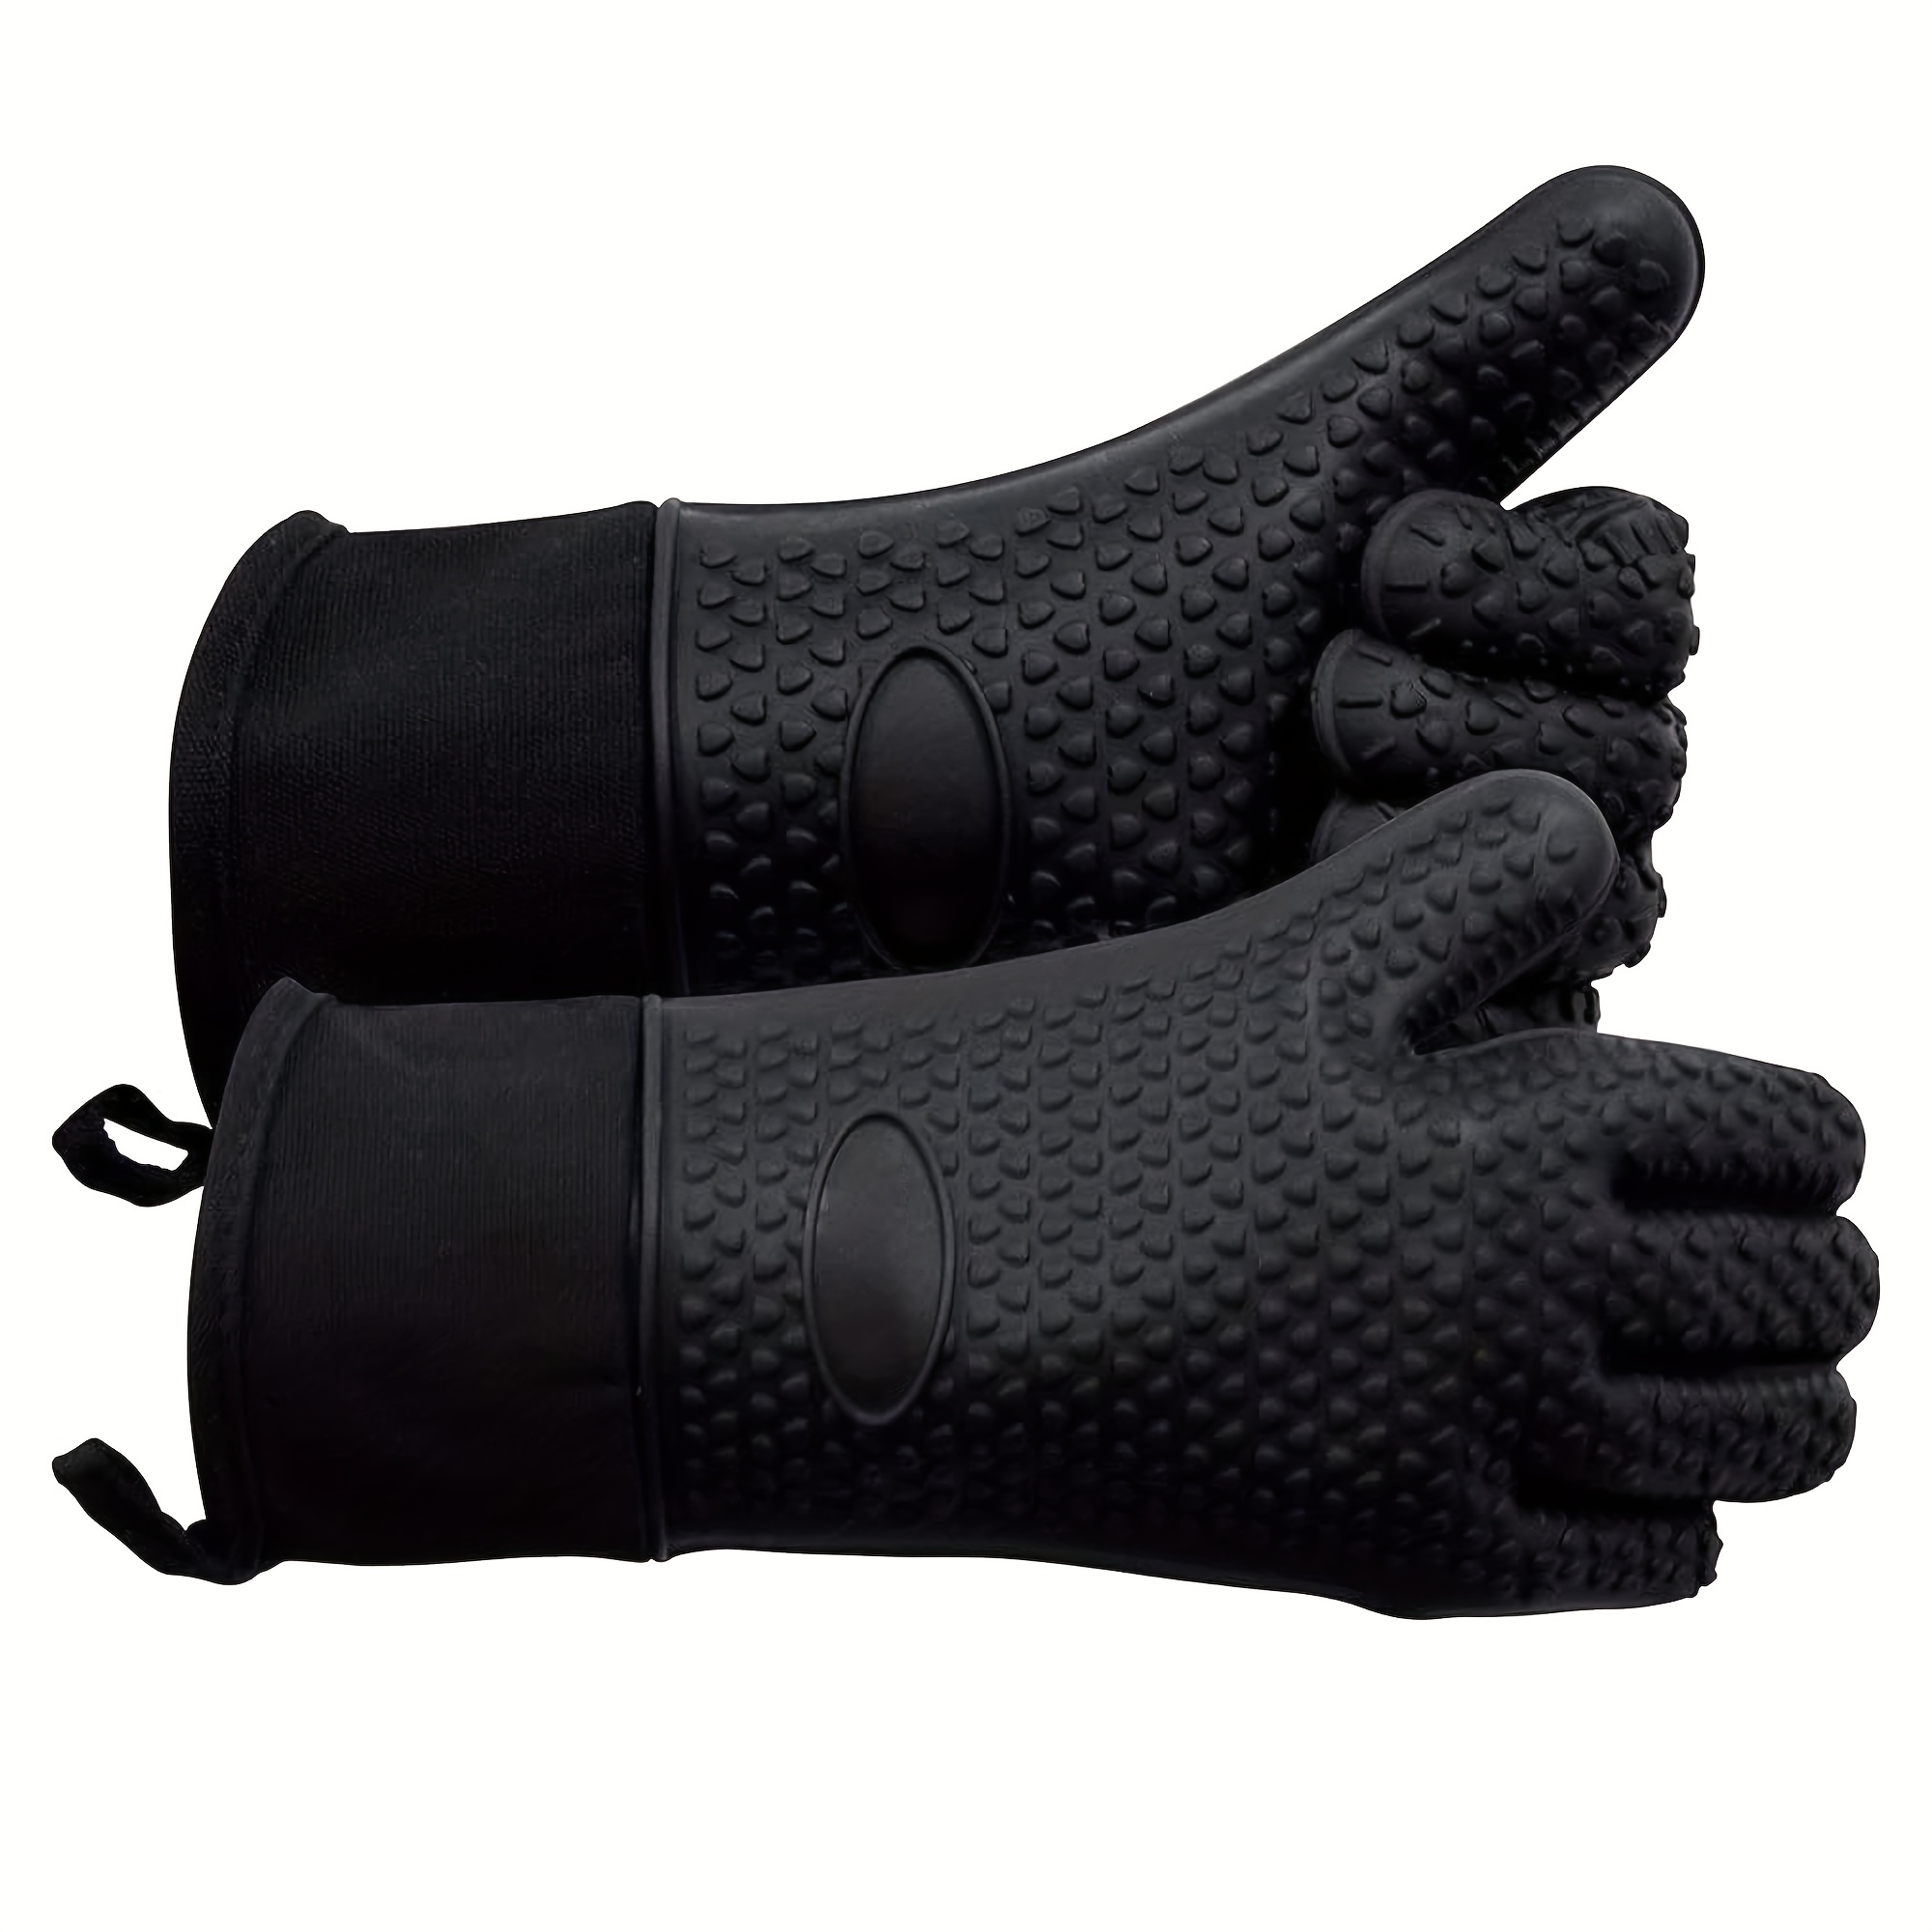 1 Pair Short Oven Mitts, Heat Resistant Silicone Kitchen Mini Mitts For 500  Degrees, Non-slip Grip Surfaces And Hanging Loop Gloves, Baking Grilling B